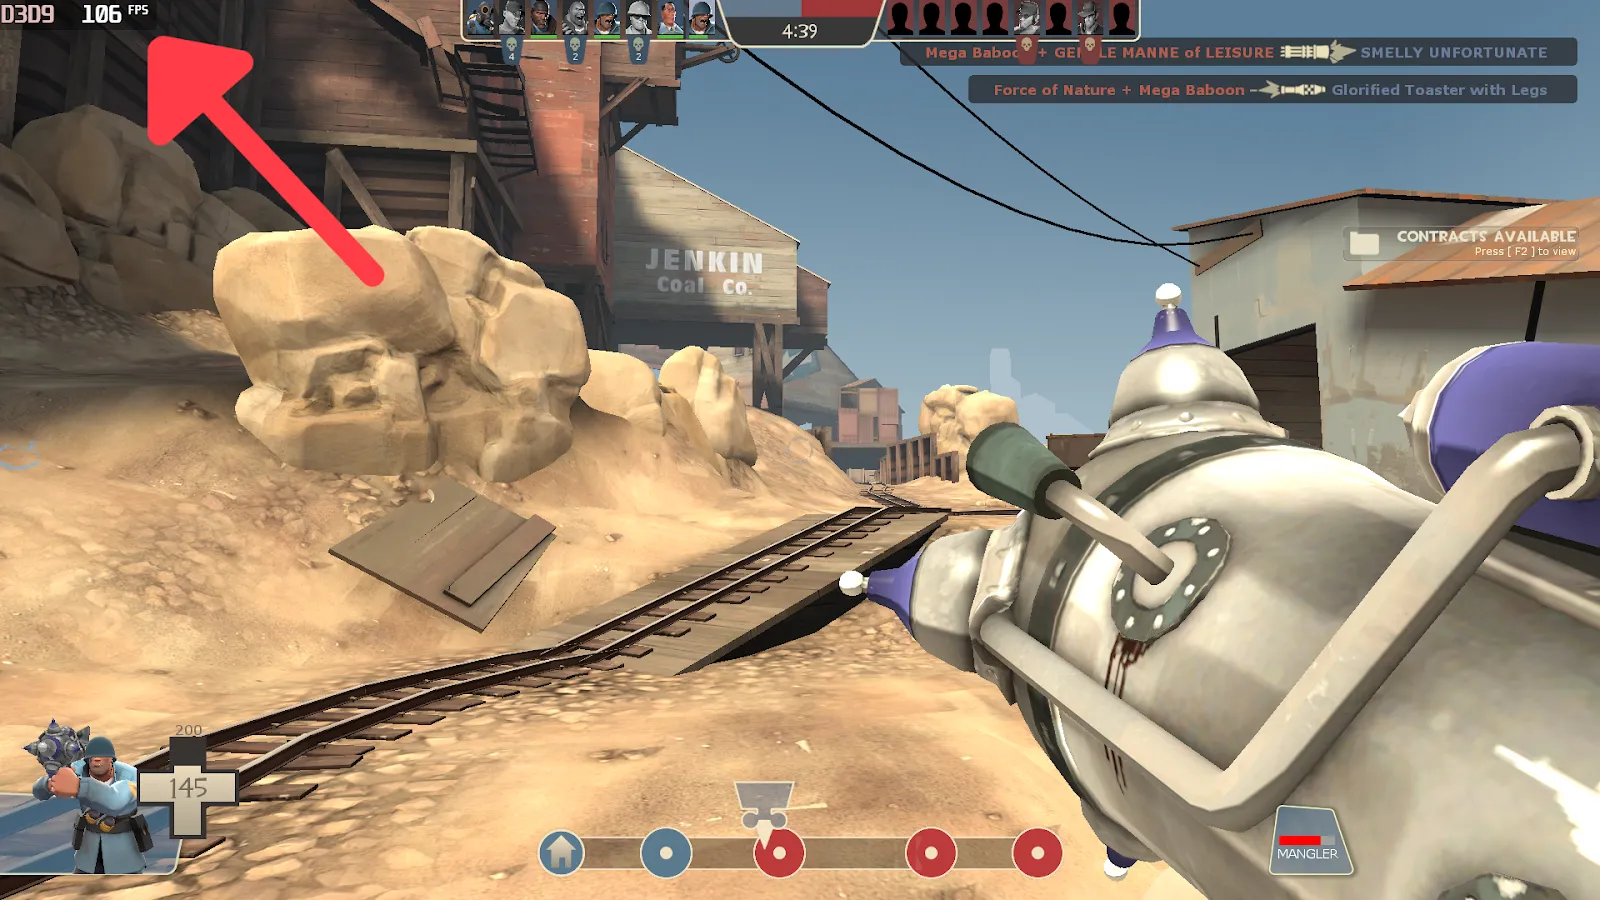 MSI show FPS in Team Fortress 2